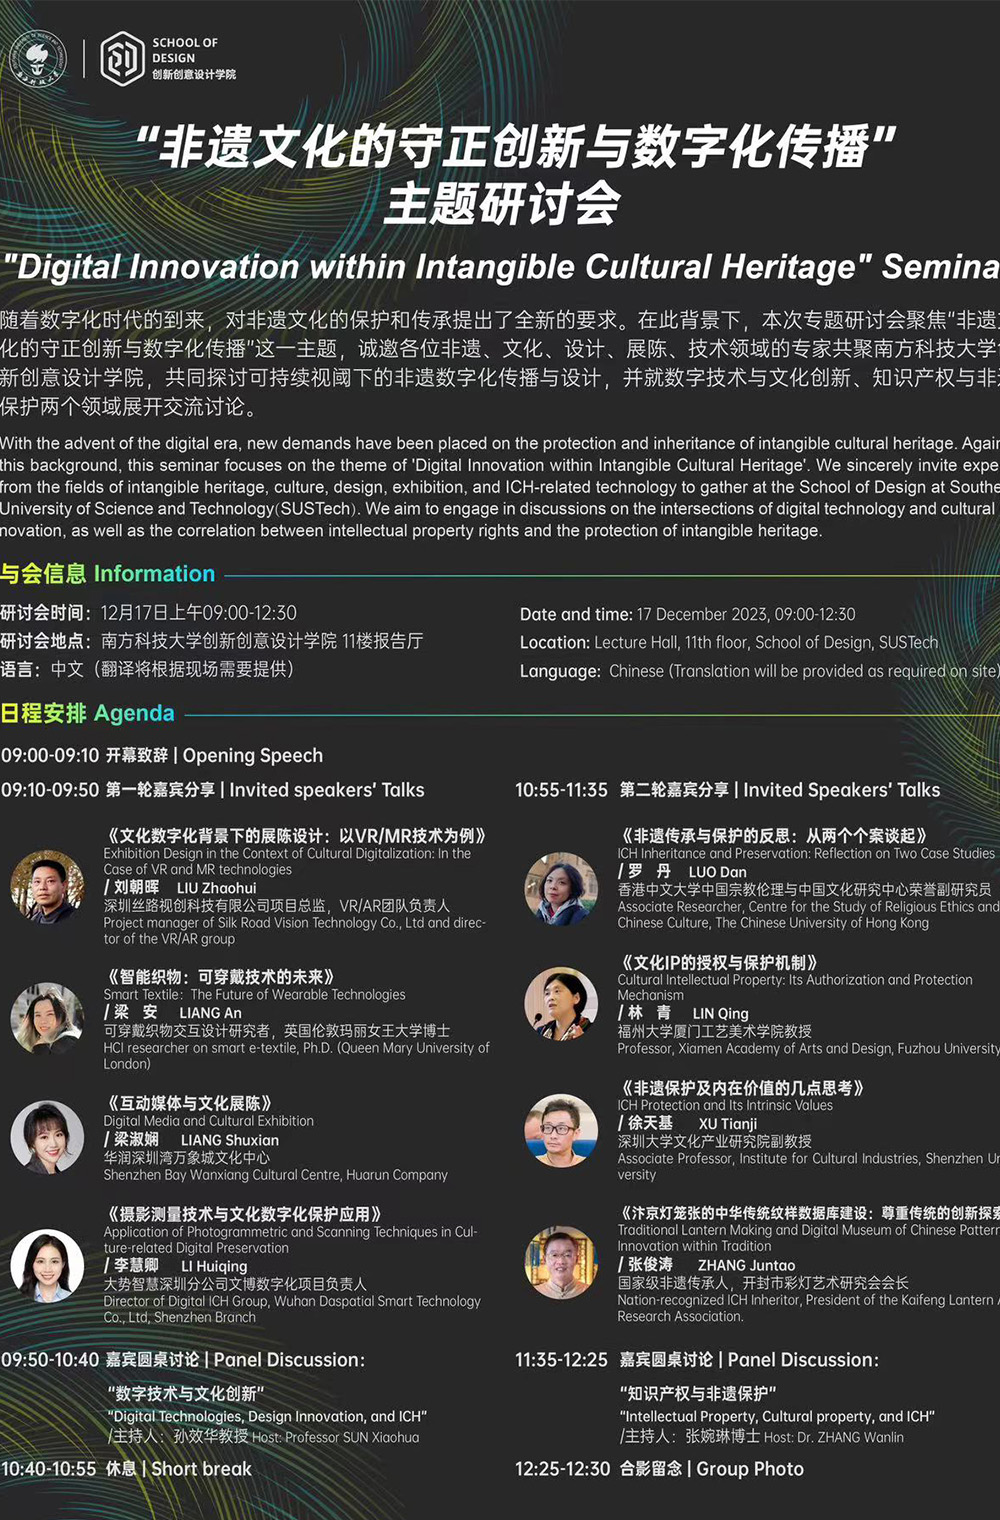 "Digital Innovation within Intangible Cultural Heritage" Seminar